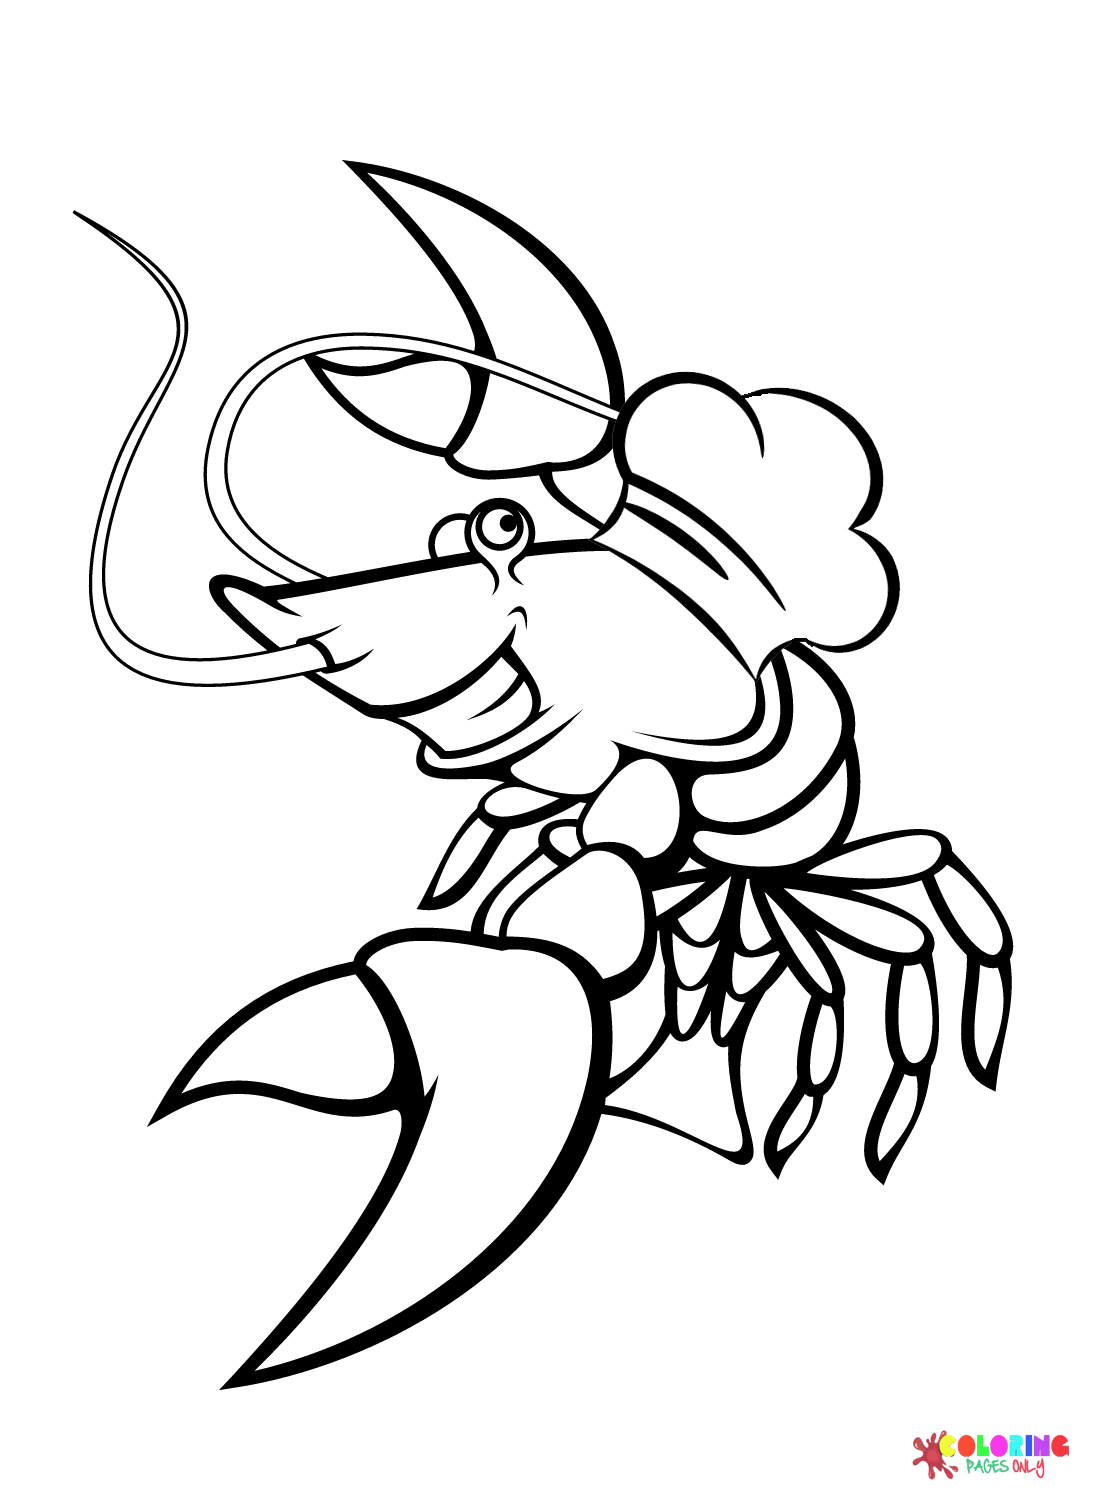 Chef Lobster Coloring Page